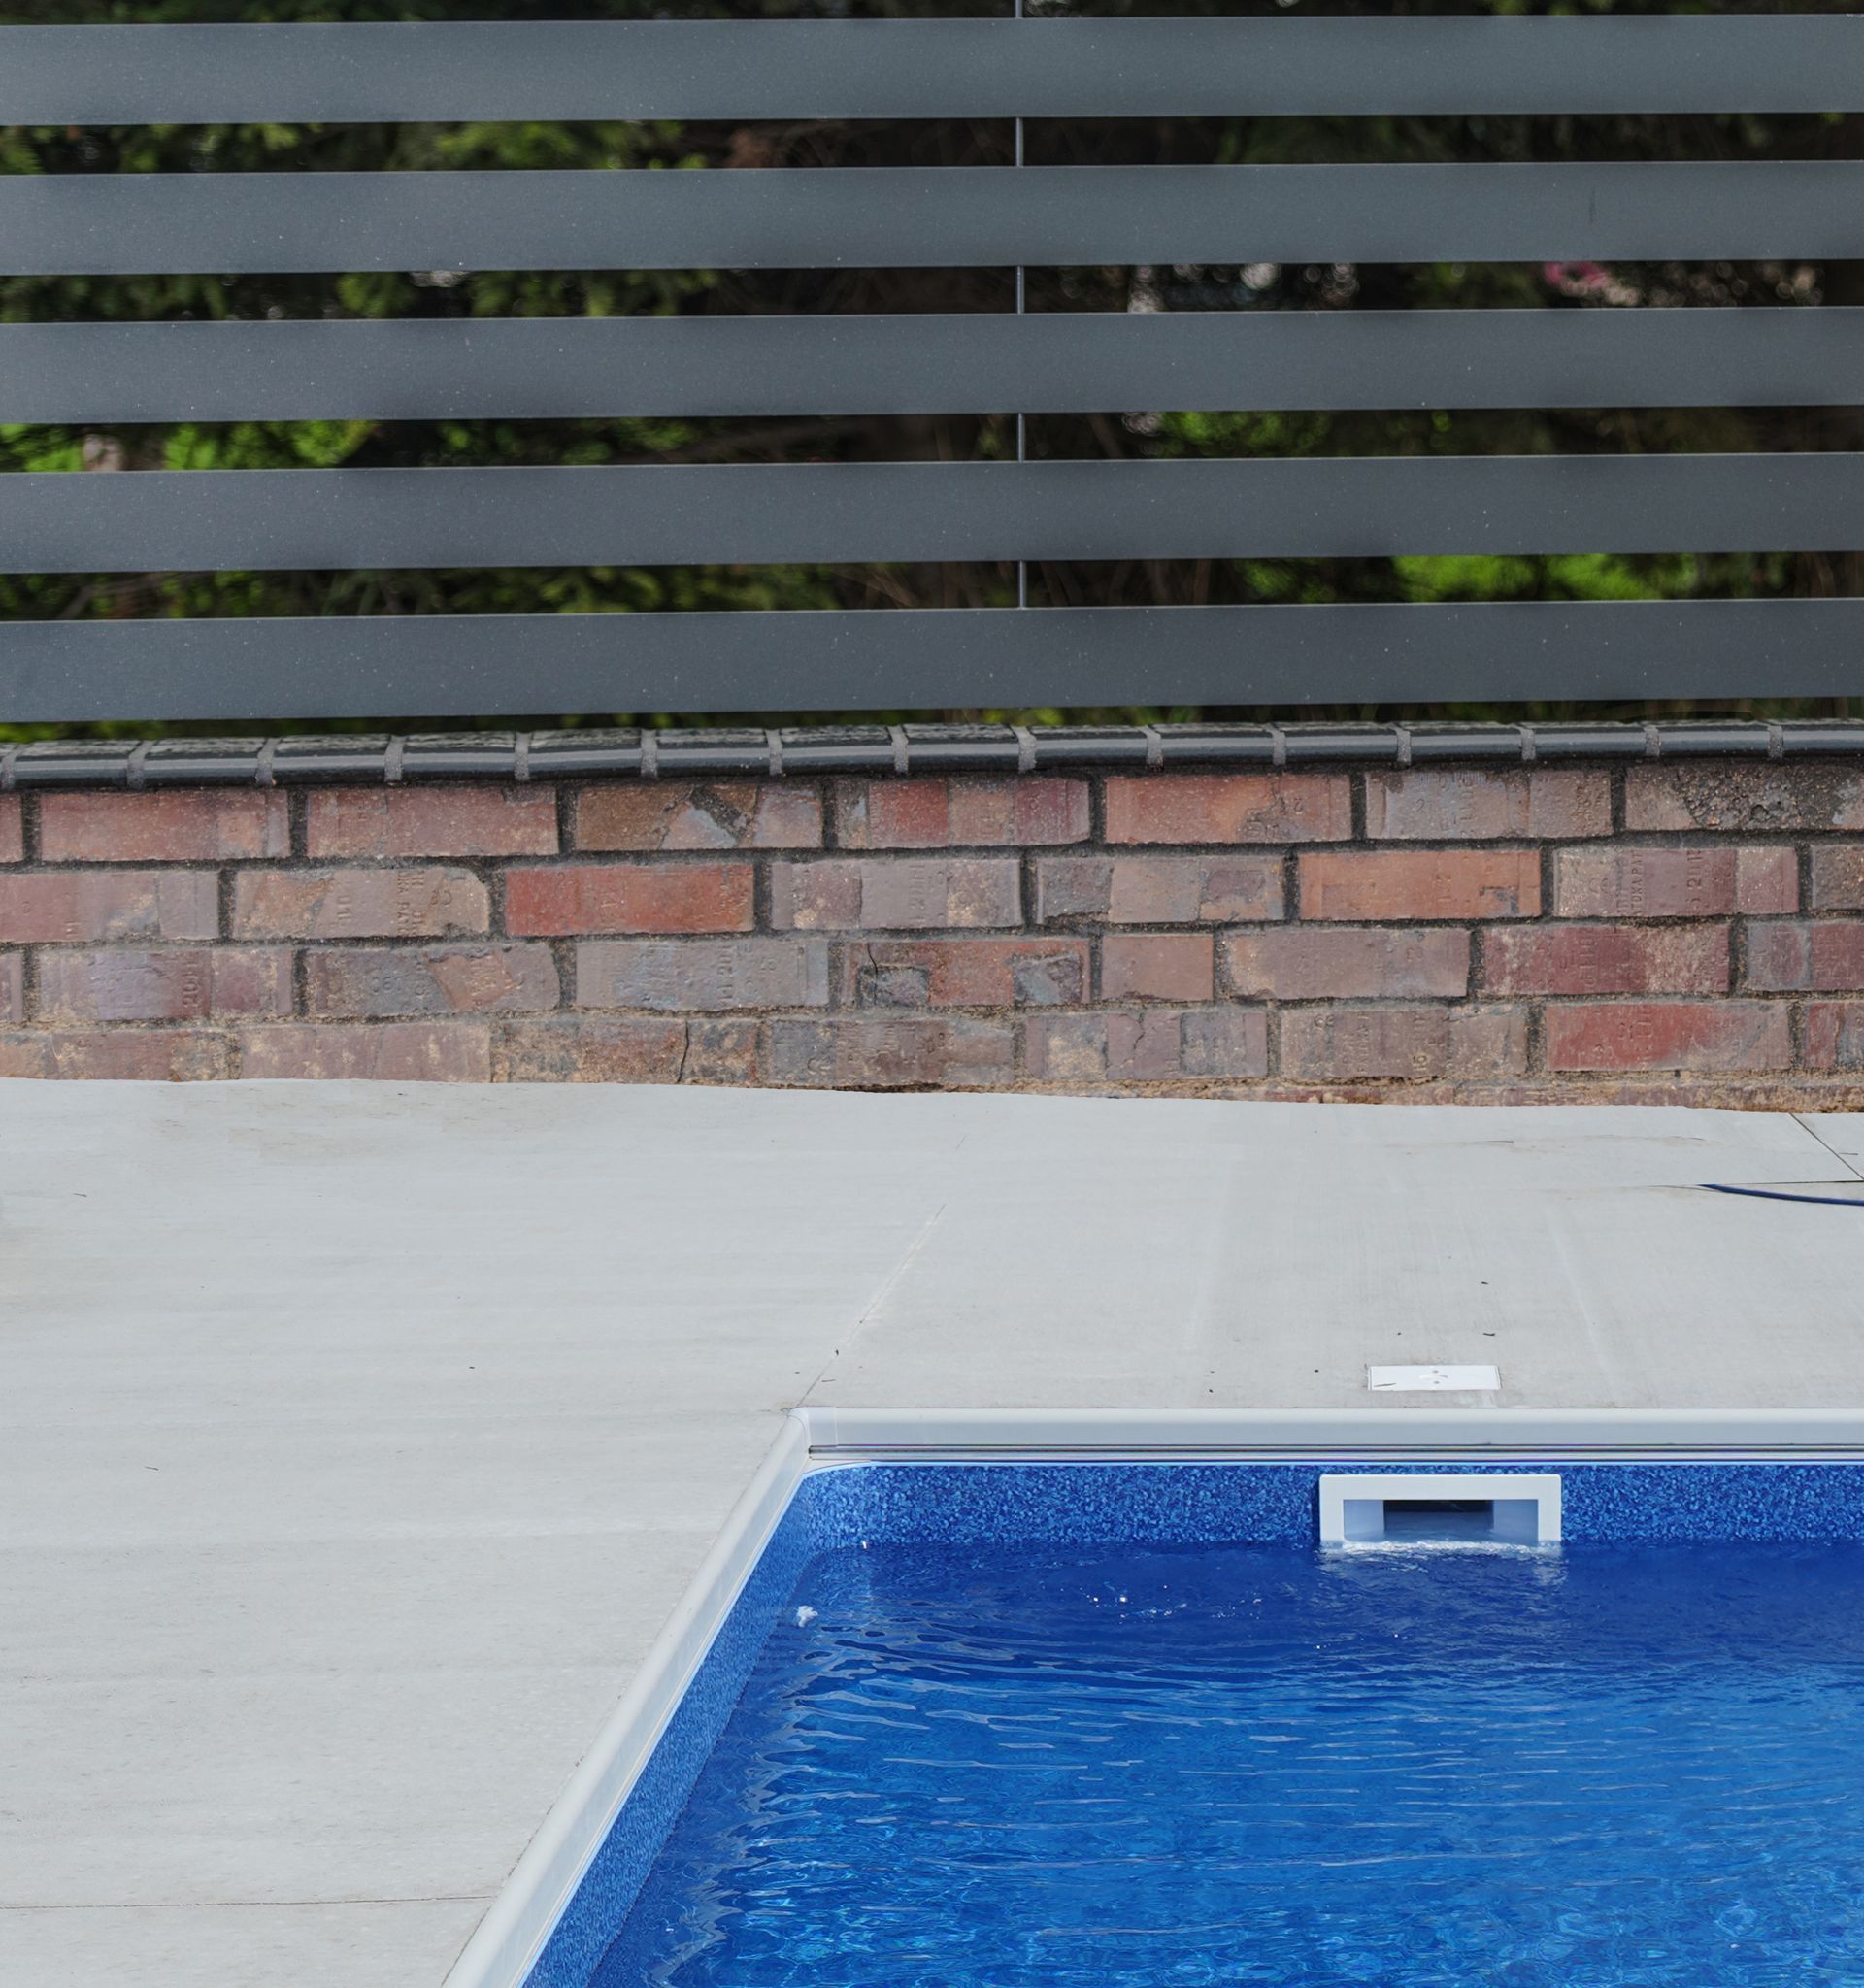 Peavler Construction Prioritizes Safety & Security When Installing Pool Fences in Mid-Missouri.